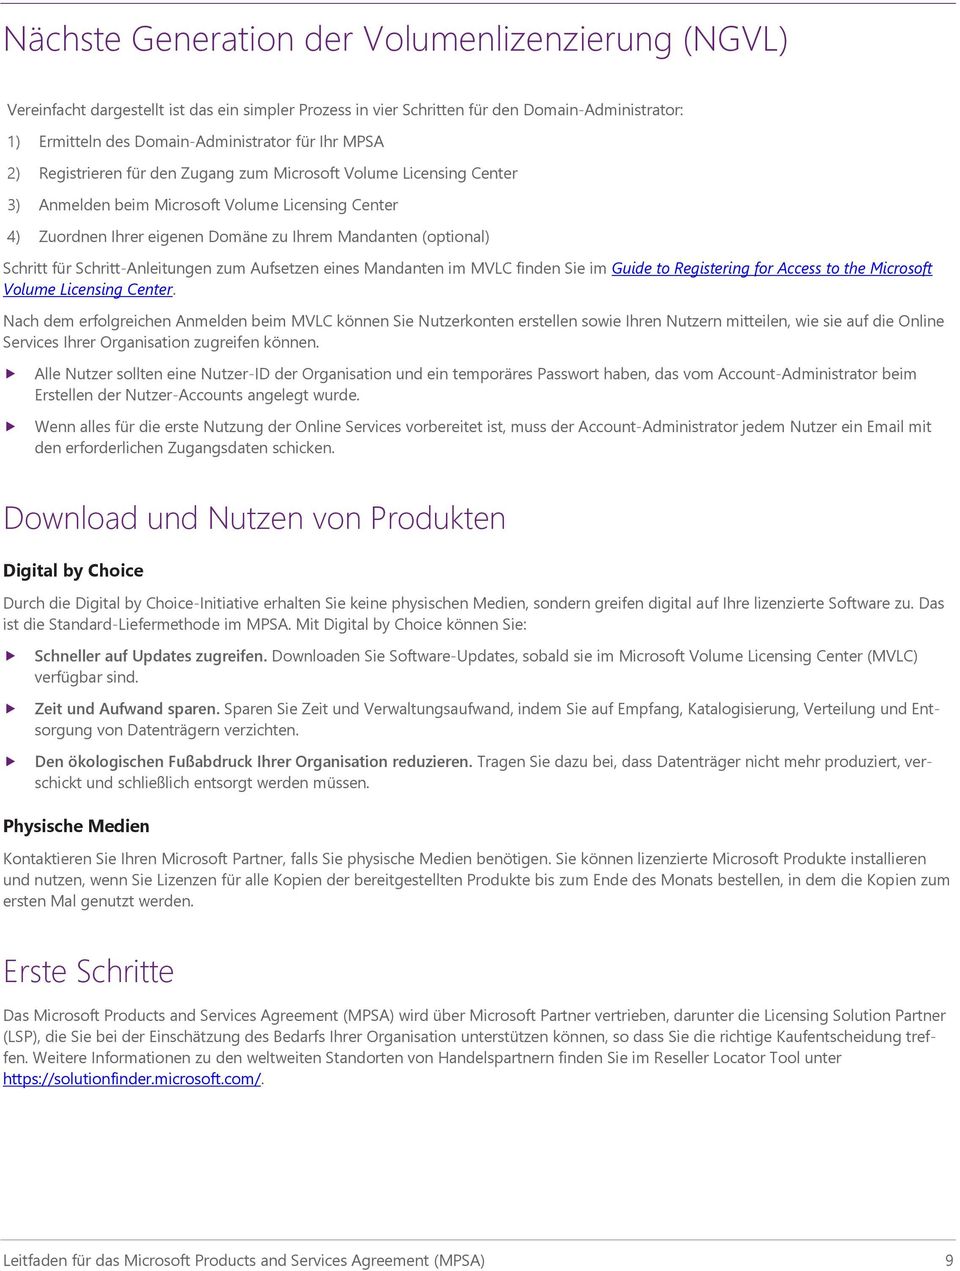 im MVLC finden Sie im Guide to Registering for Access to the Microsoft Volume Licensing Center.